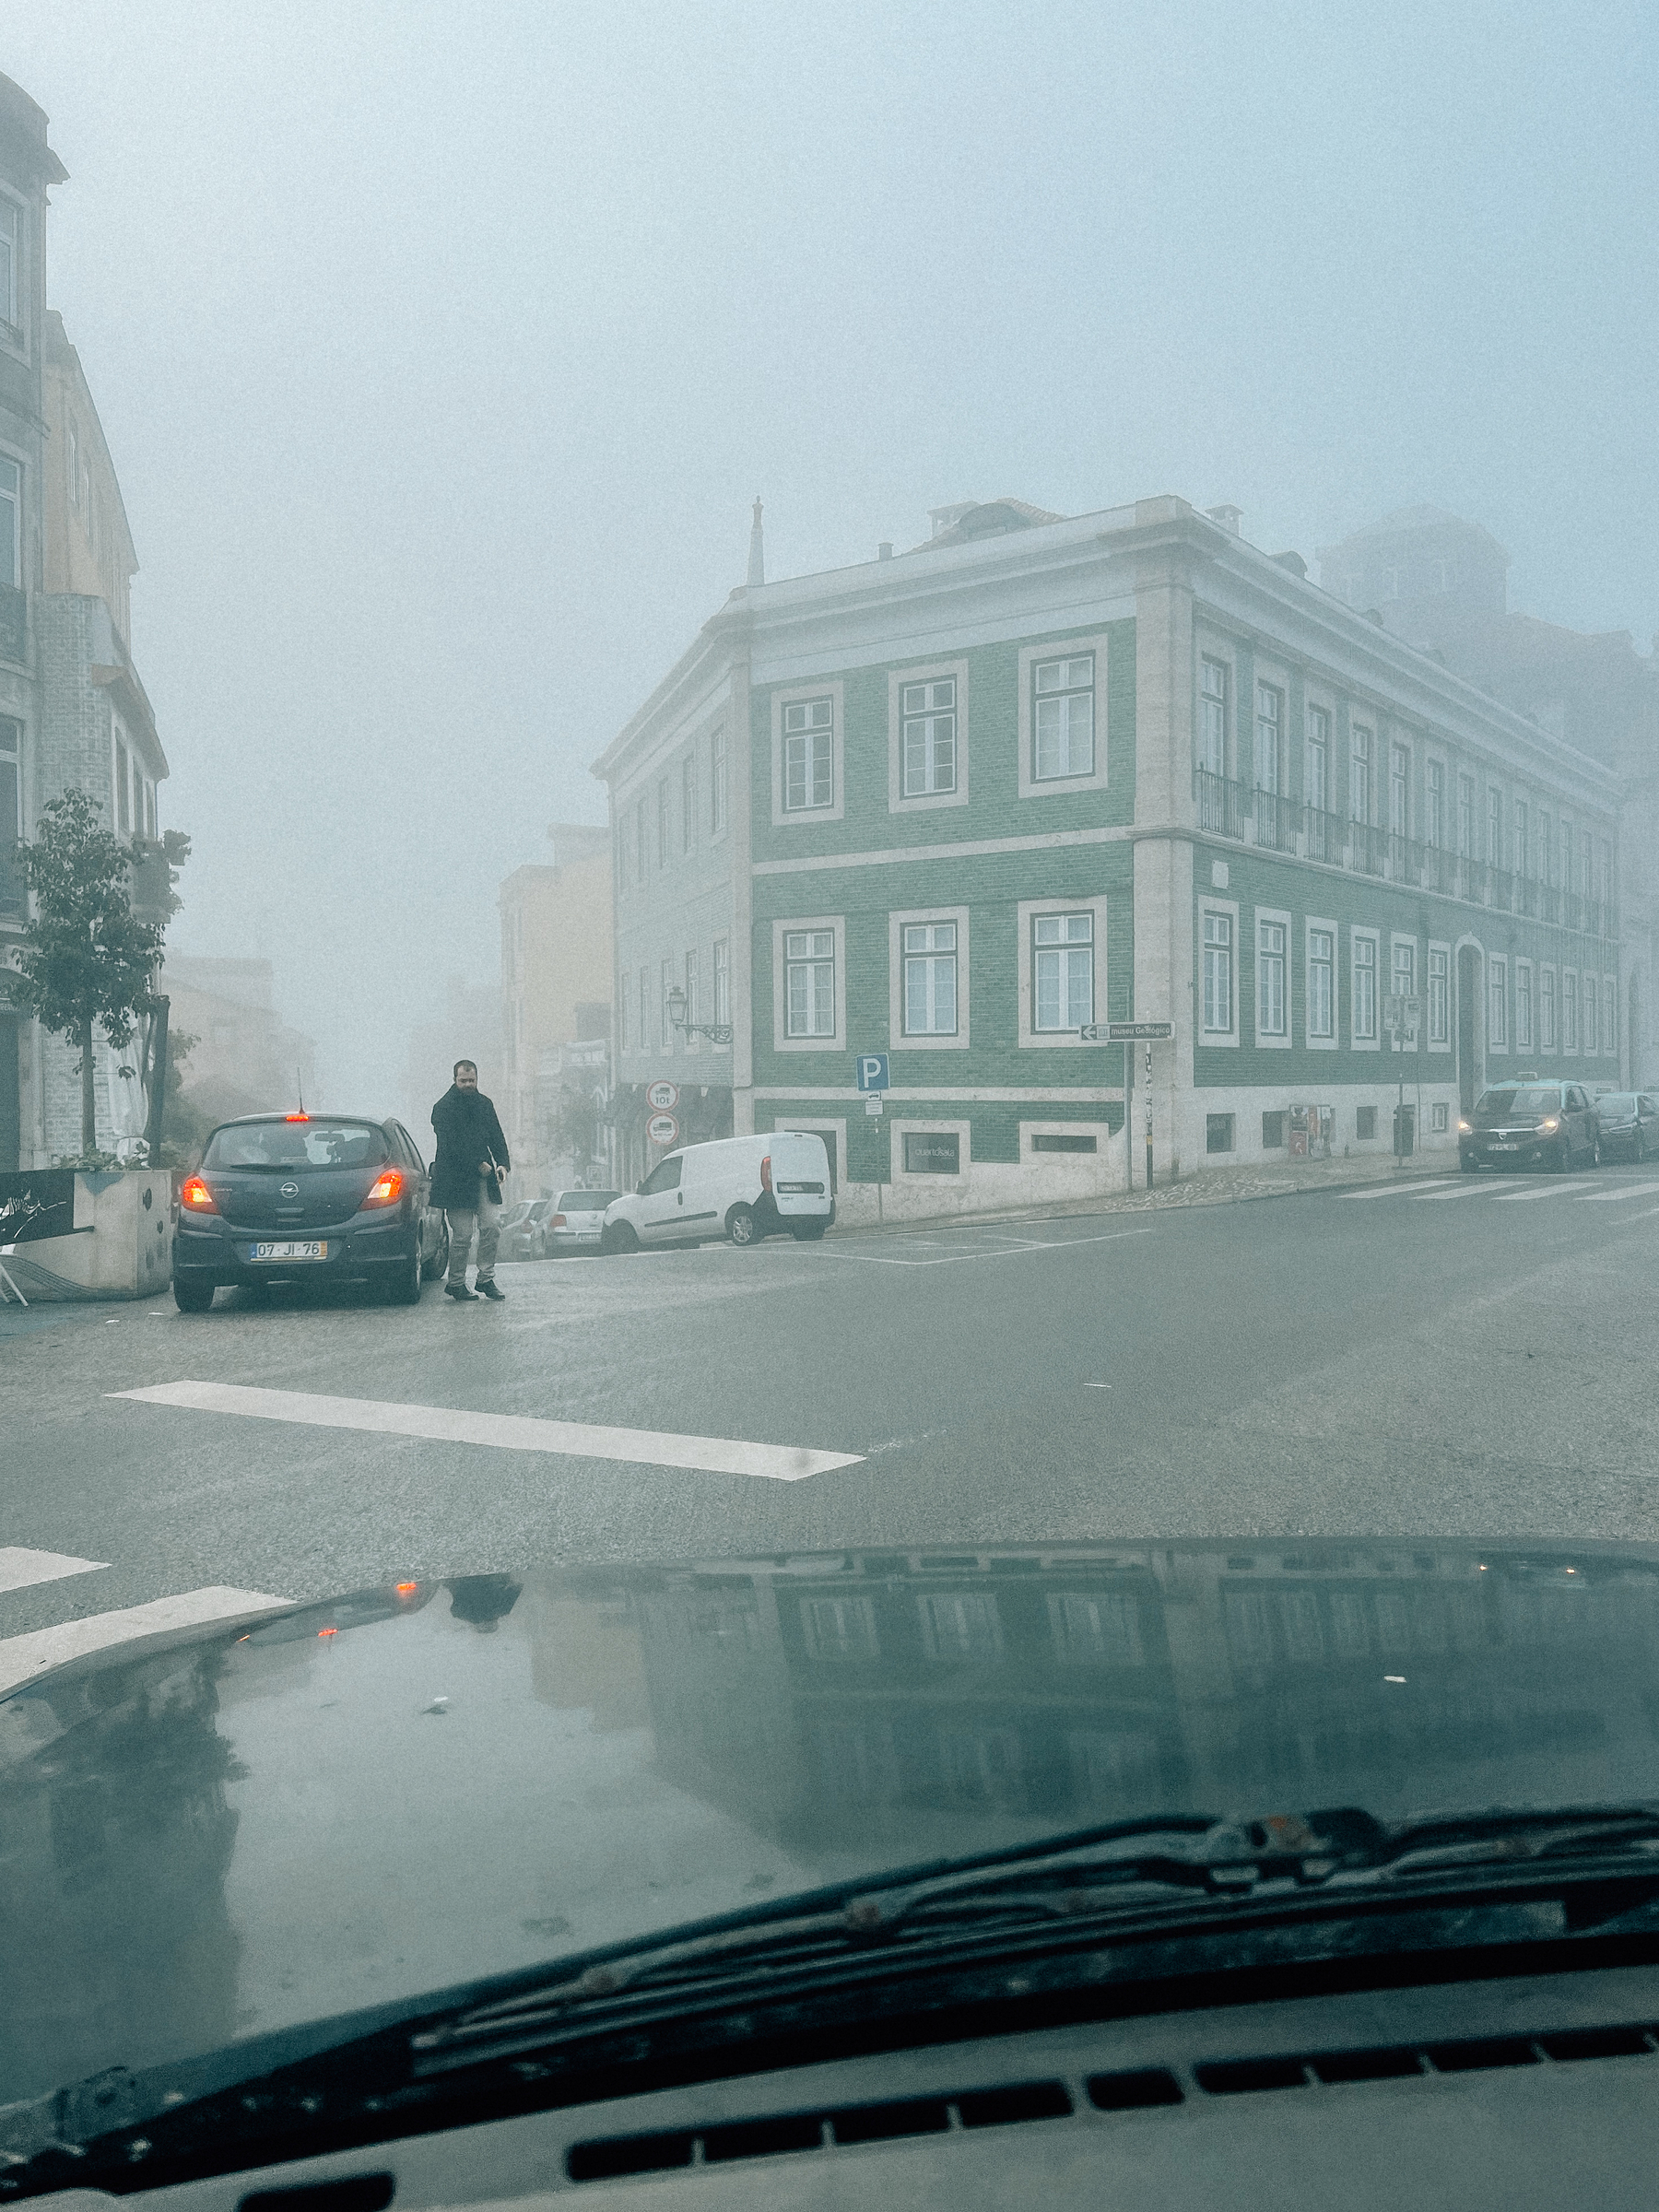 Foggy city street scene with a pedestrian crossing the road, vehicles parked on the side, and a green building on the corner, viewed from inside a car through the windshield.